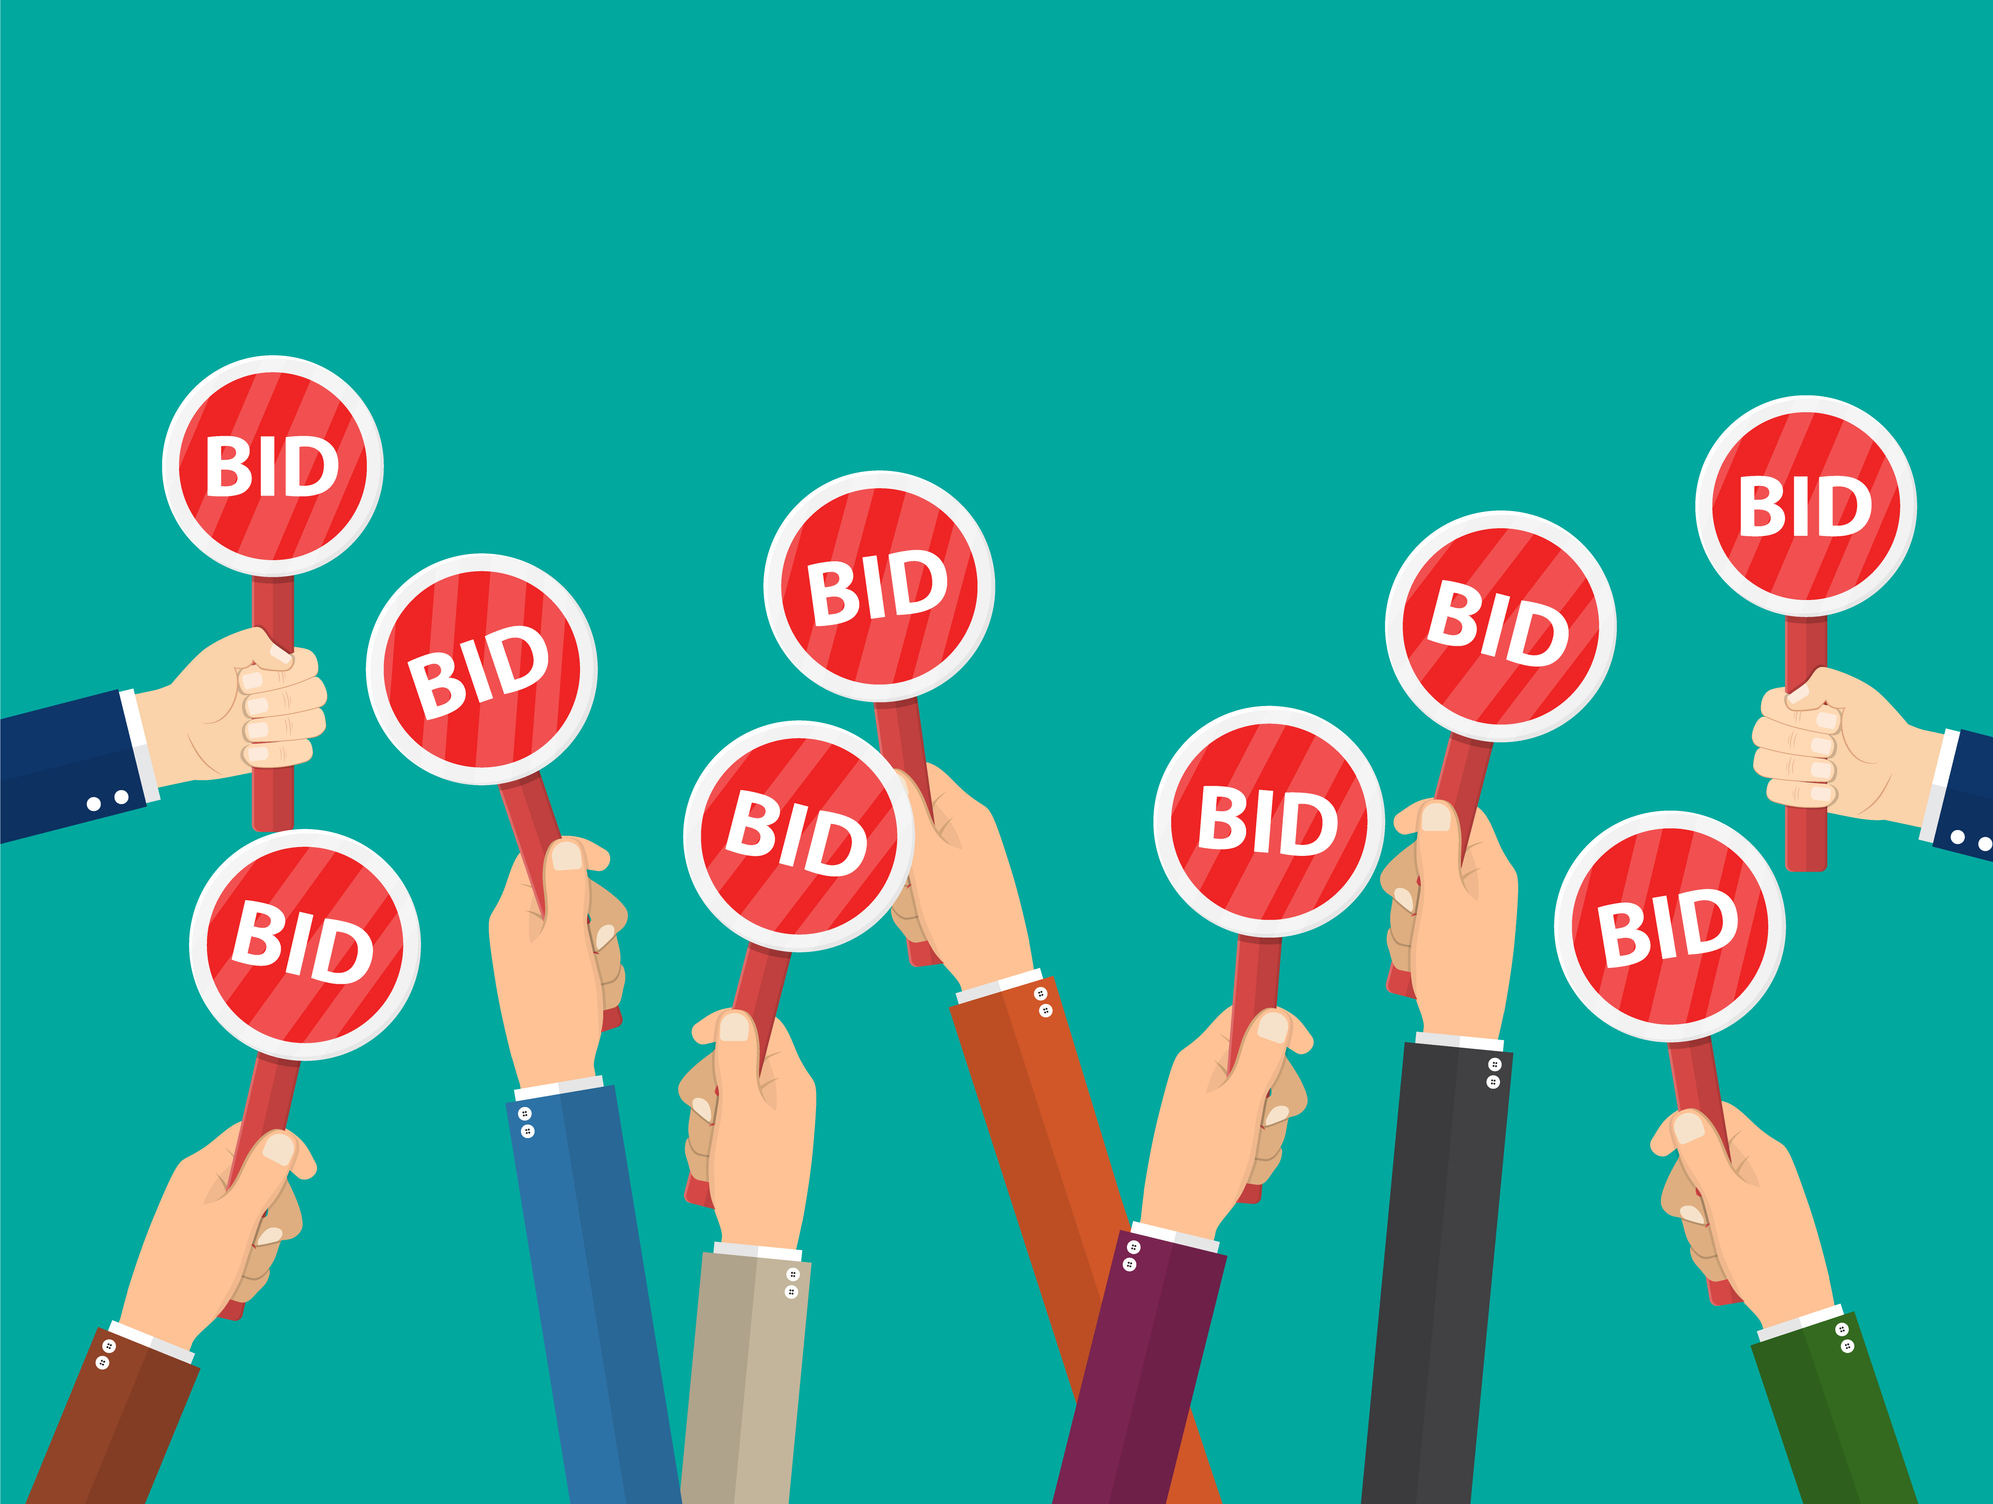 6 Strategies to Maximize Silent Auction Item Sales